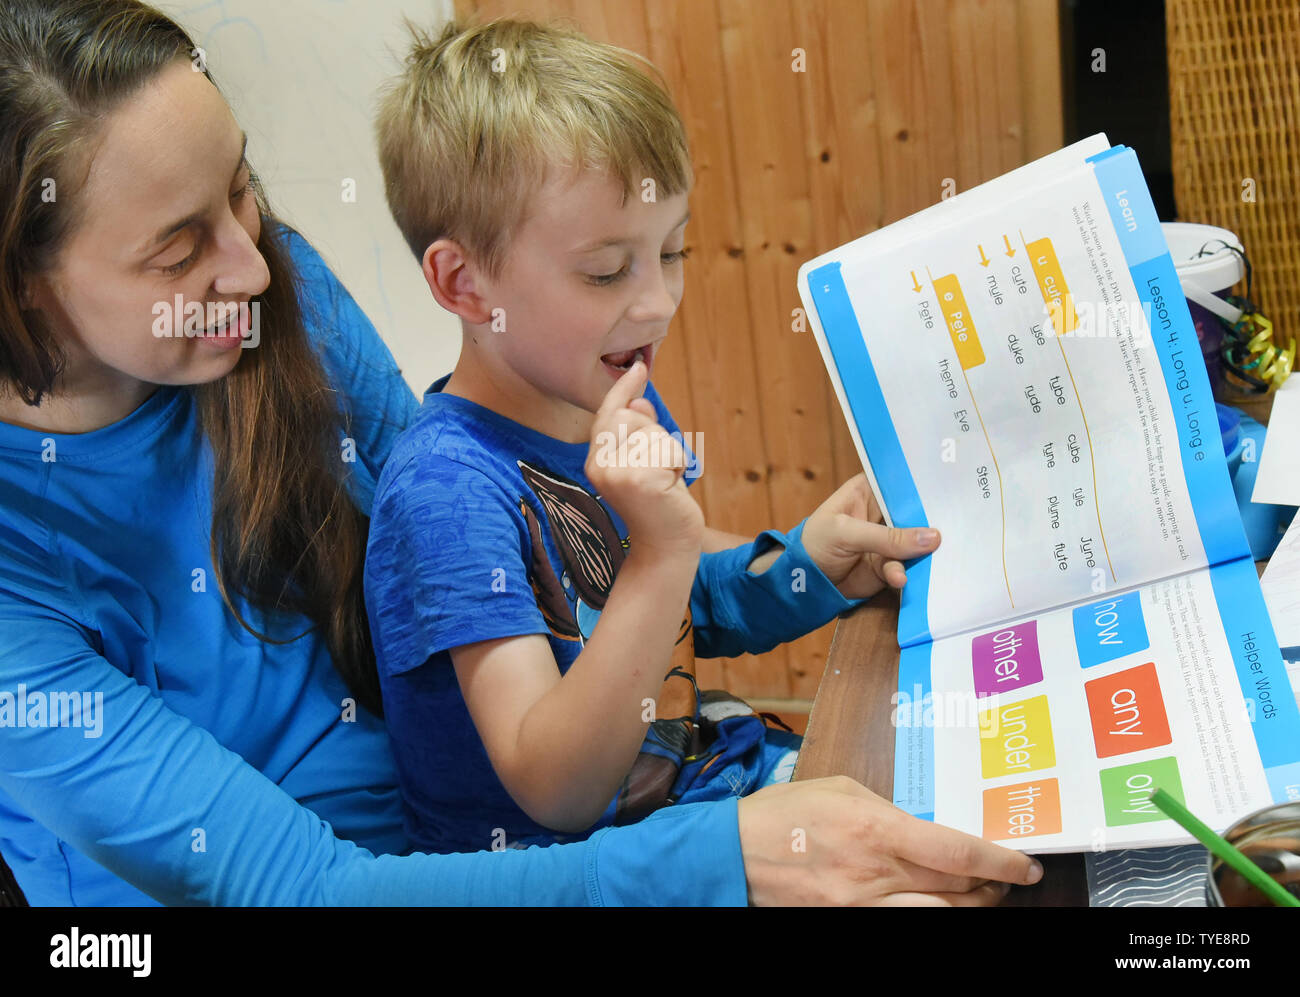 25 June 2019, Saxony, Schönwölkau: With five of her six children sitting Emma Fenchel, the mother of six children, learns English with her five-year-old son Matteo. The father, Stefan Fenchel and the Canadian moved from Bavaria to Leipzig in 2004 and now live in Schönwölkau with their six children, three girls and three boys between 12 and one year old. In the small village they have built an old house and enjoy the country life with their children. While at school in the neighboring city the German language is of course spoken, the whole family speaks English at home. (to dpa 'Where the child Stock Photo